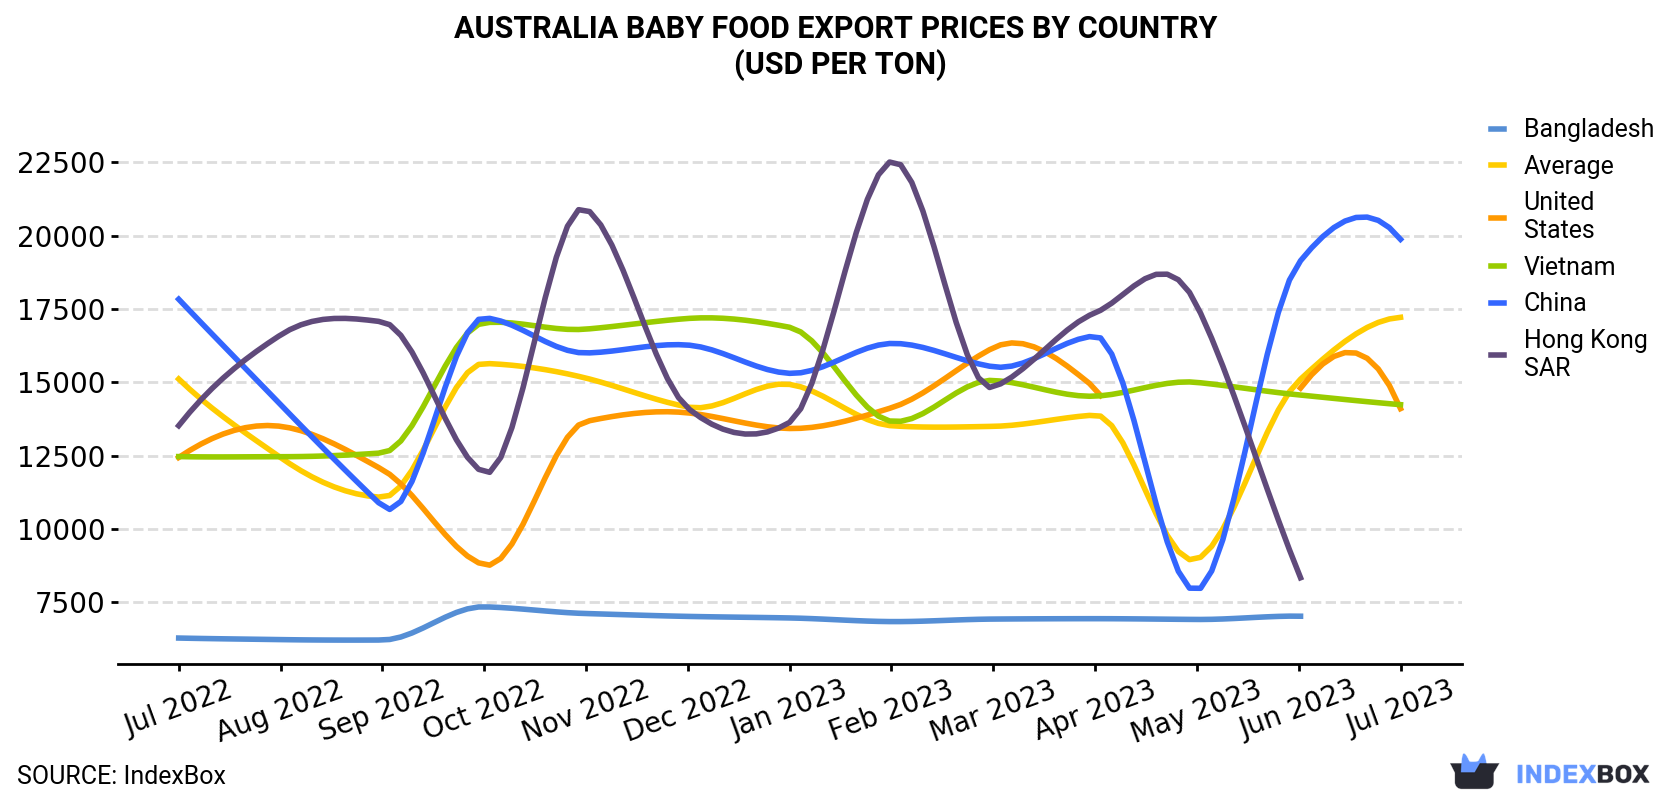 Australia Baby Food Export Prices By Country (USD Per Ton)